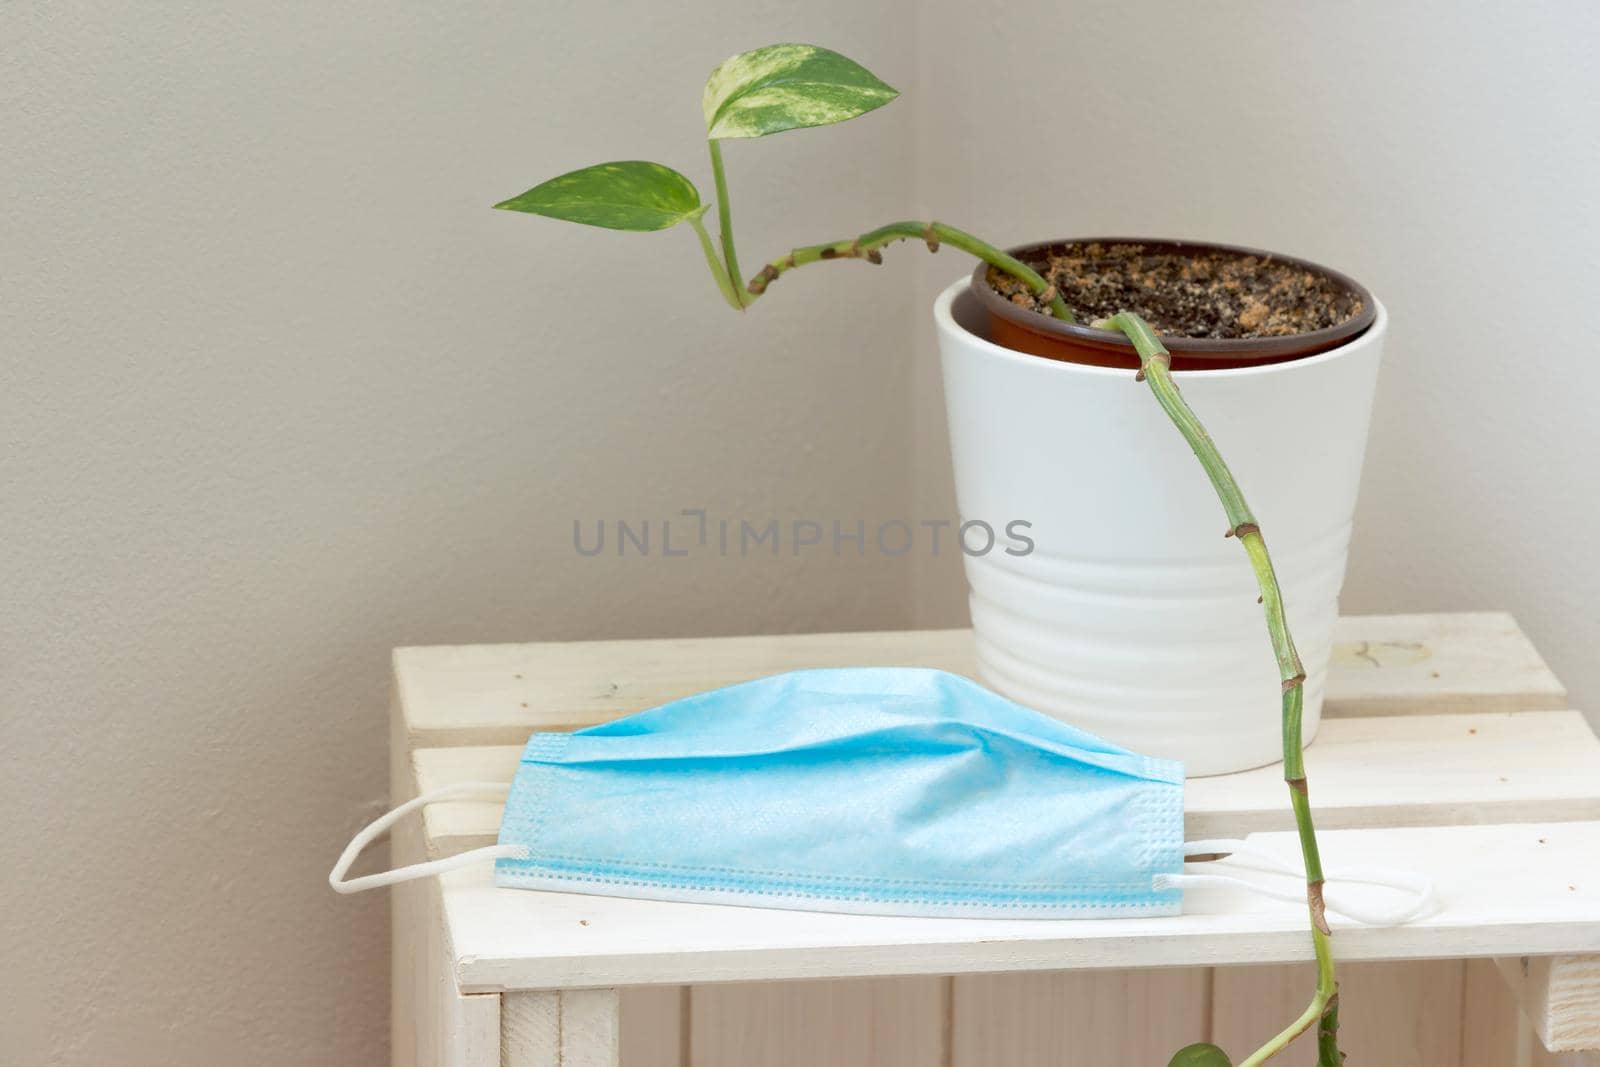 Surgical medical mask on top of a white wooden box next to a wall with a flower pot on top.